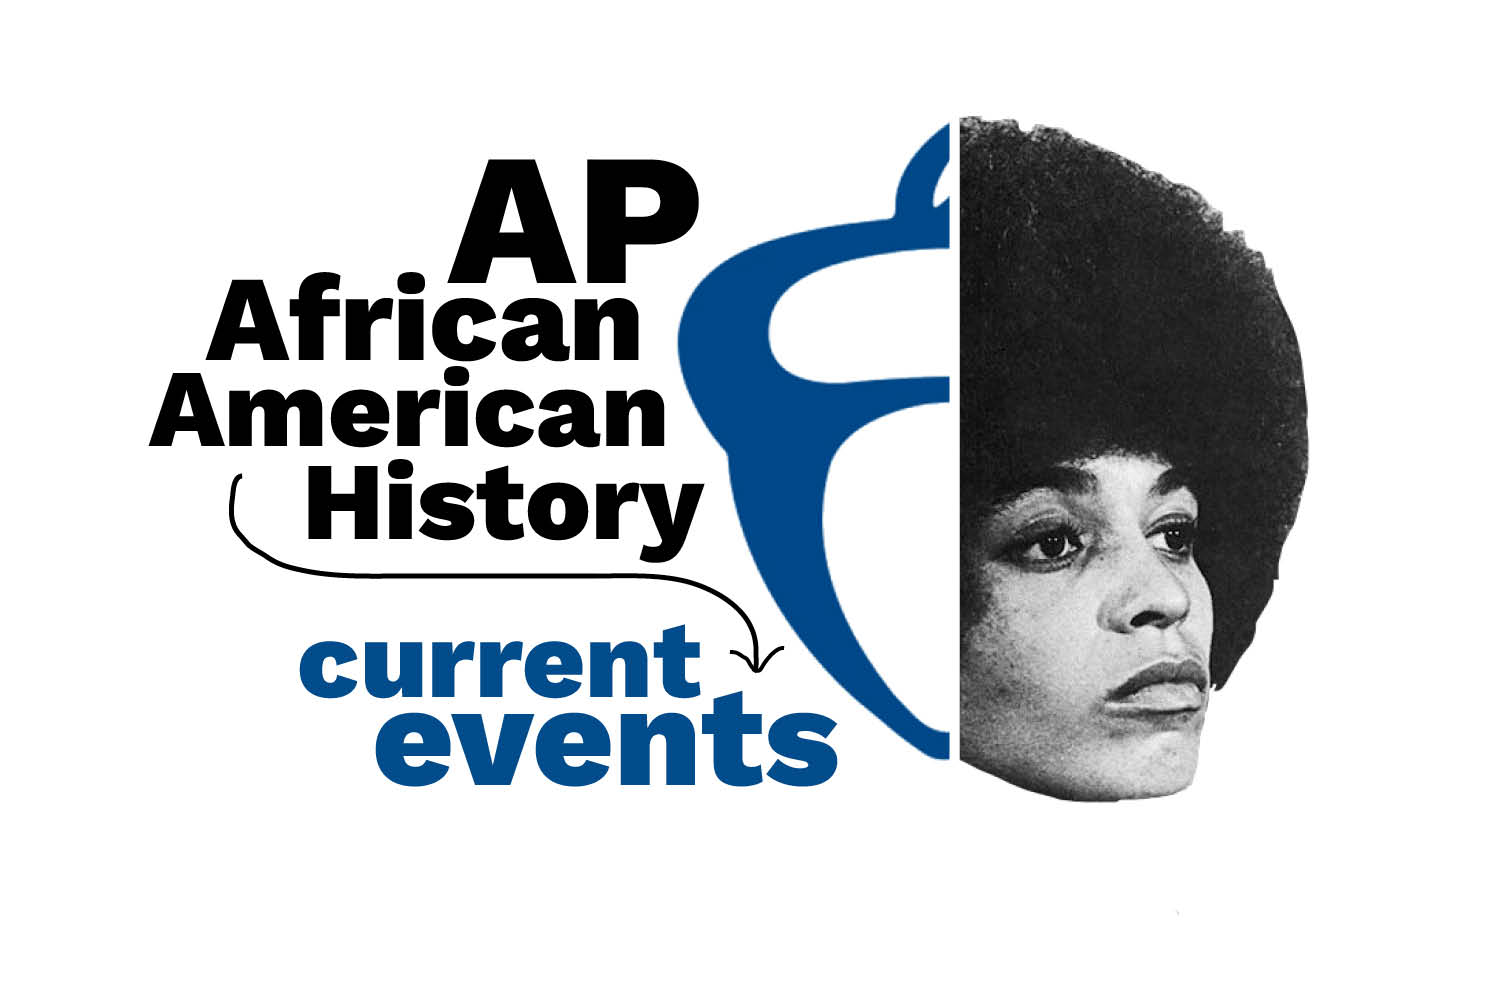 The AP African American History course has removed important topics including the discussion of Black authors such as Angela Davis. 